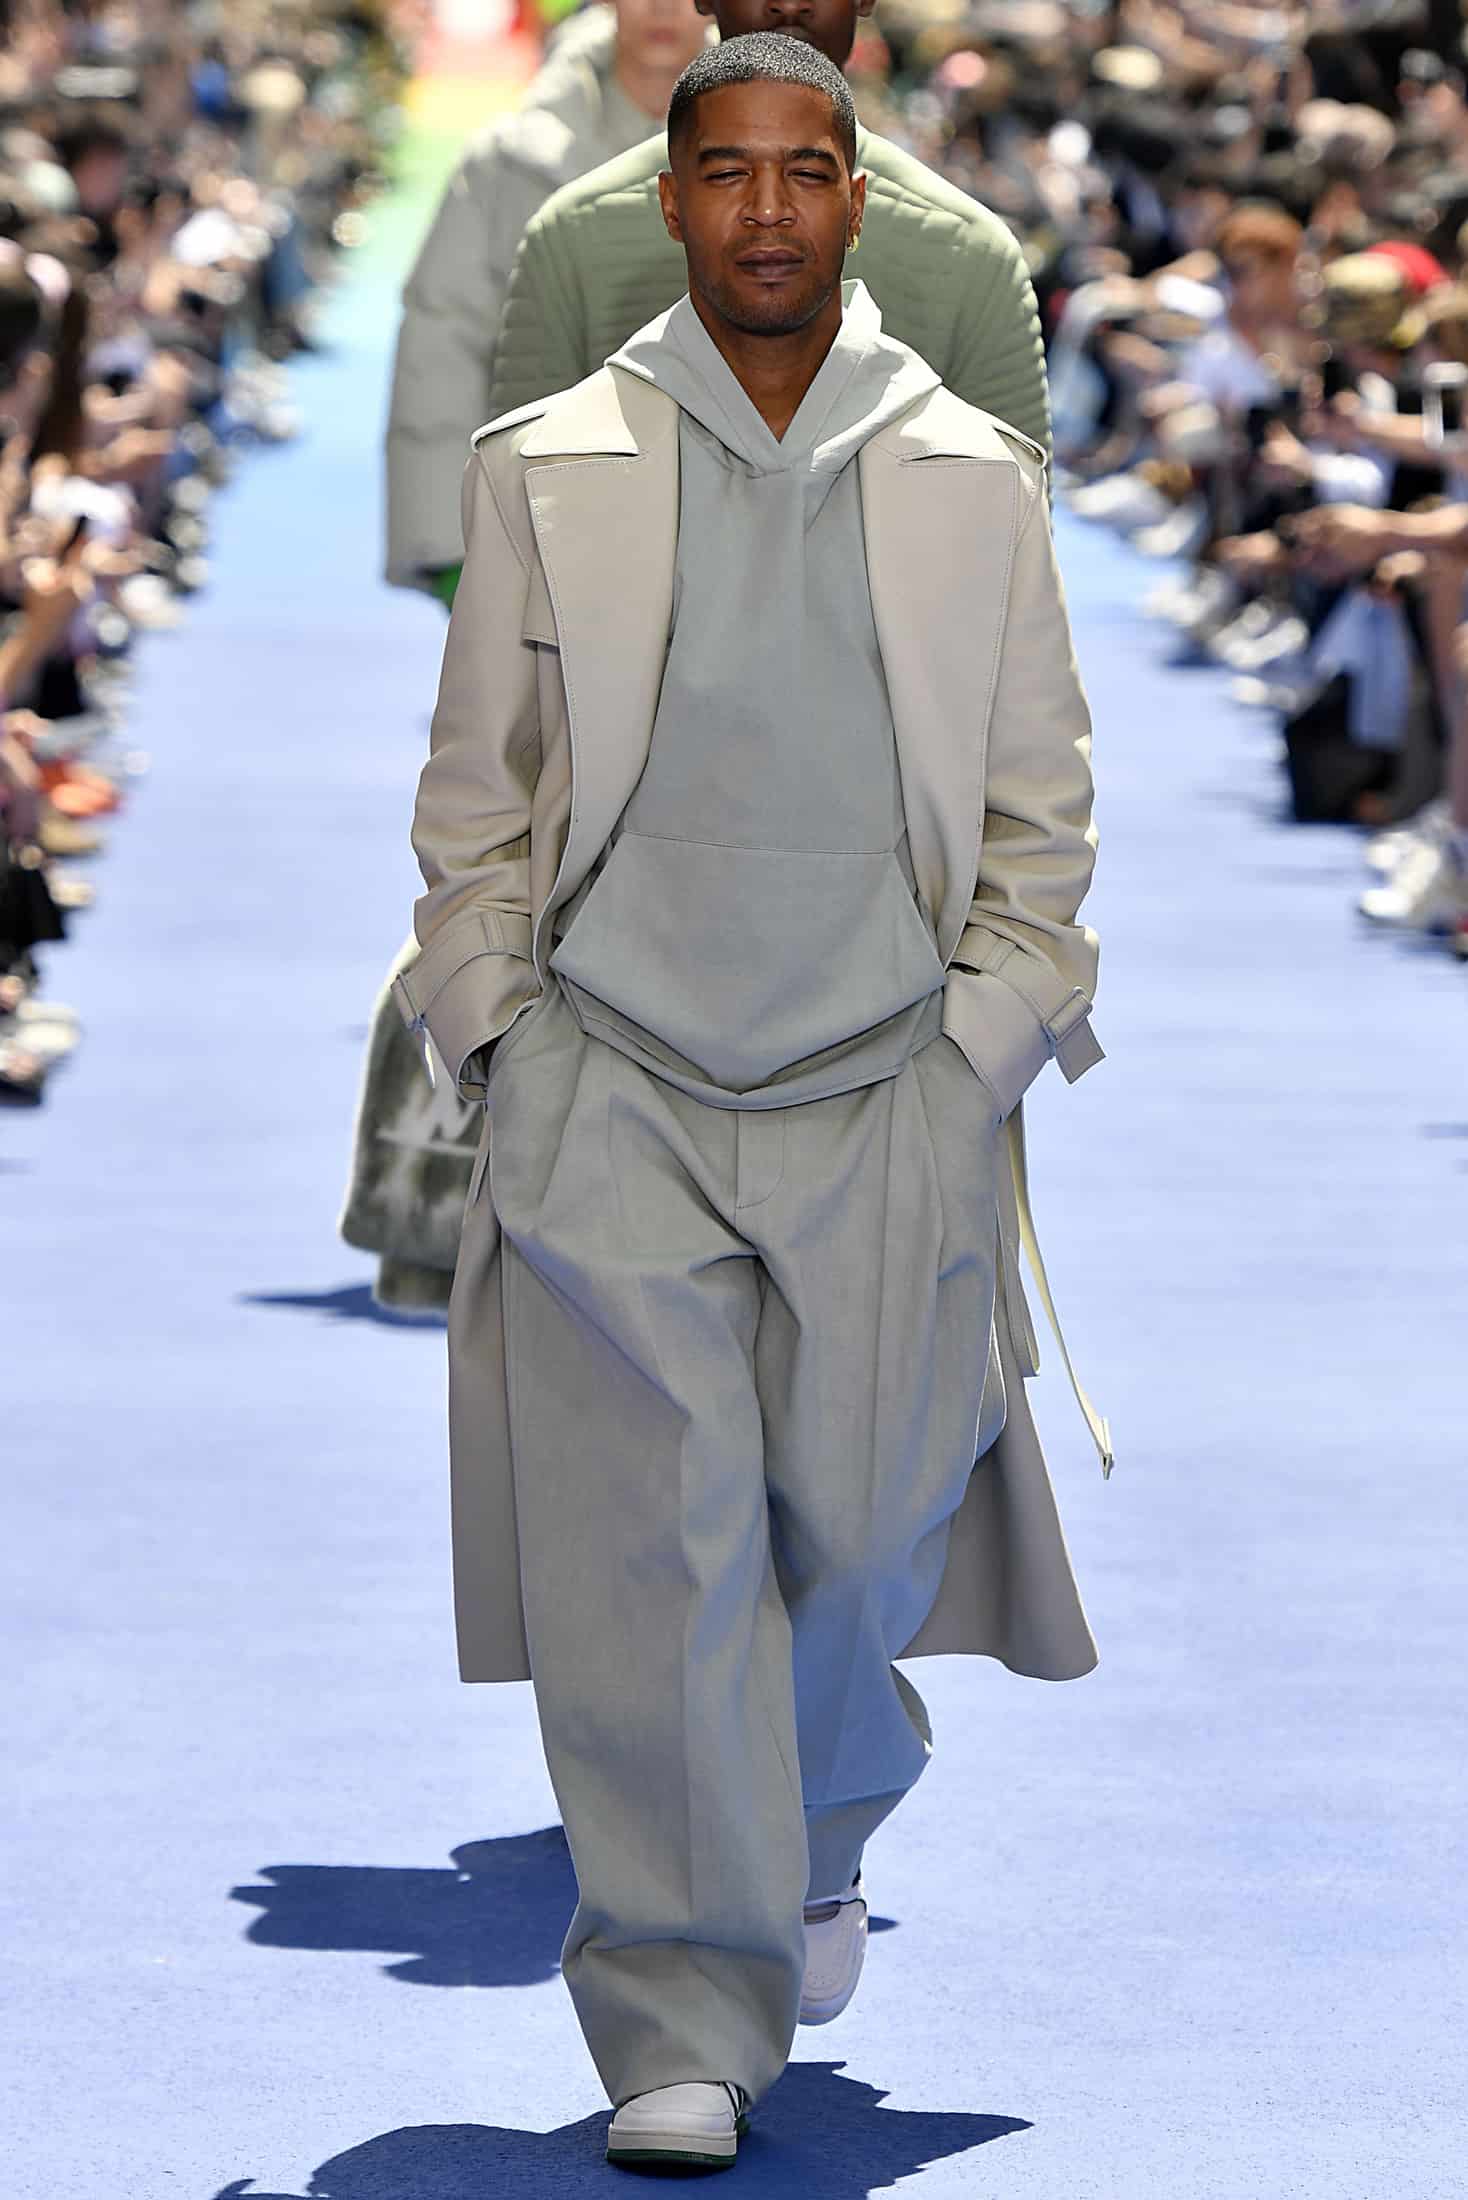 Louis Vuitton on X: #LVMenSS19 by @VirgilAbloh Kid Cudi walking the runway  at the Men's Spring-Summer 2019 Fashion Show by @LouisVuitton's new men's  artistic director Virgil Abloh. Watch the Spring-Summer 2019 Men's